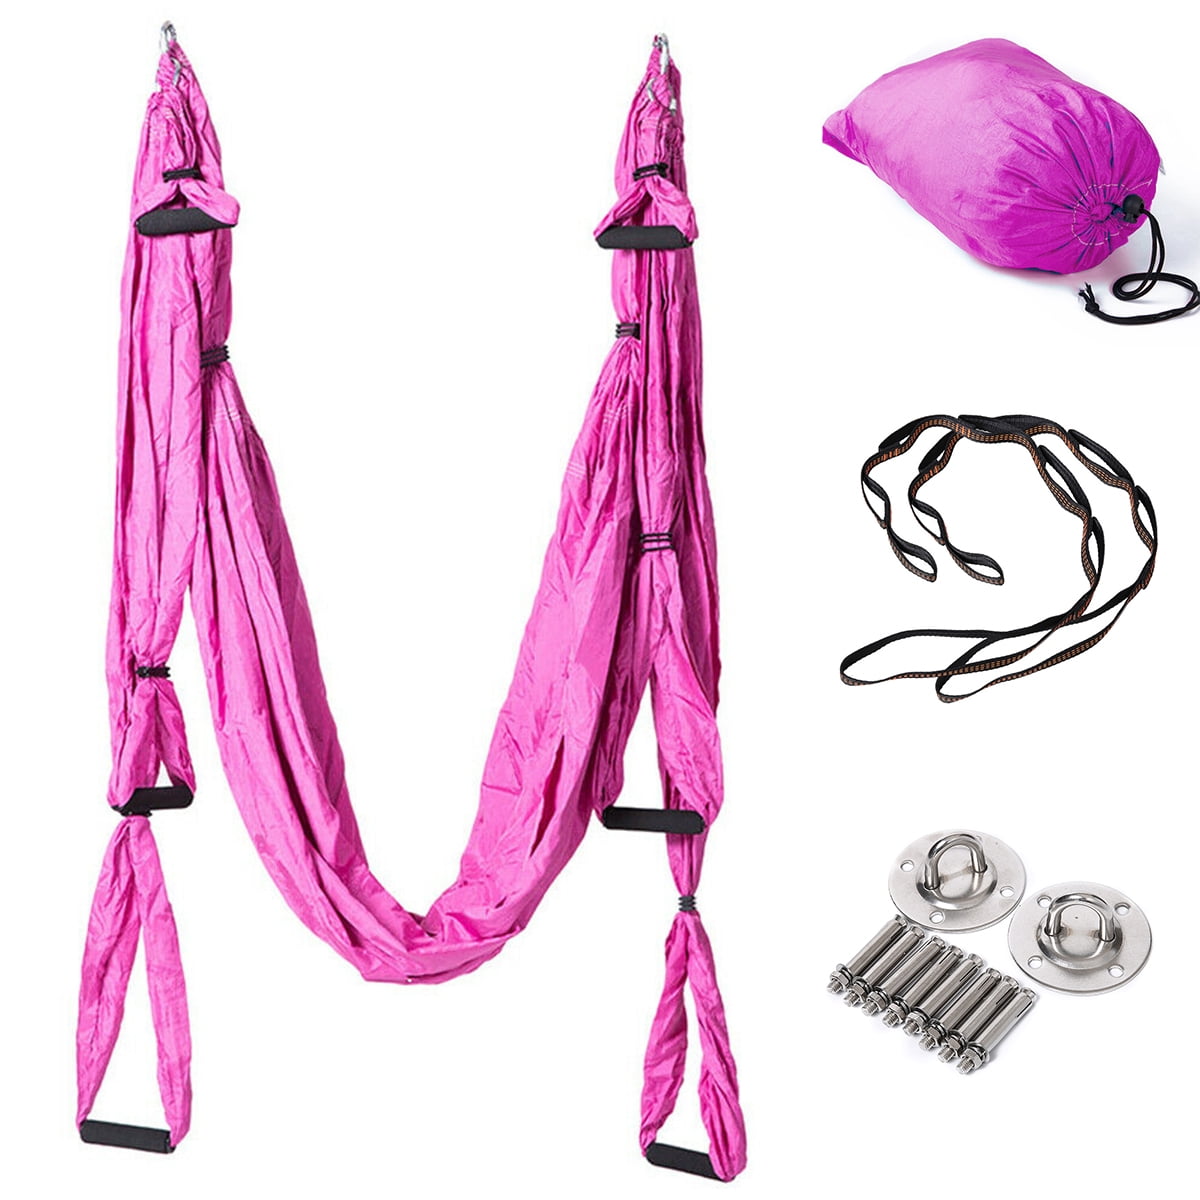 1 Hanging Instructions. Aerial Yoga Swing Set,L:5M W:2.8M Anti Gravity Hammock Lnversion Exercises Lnclude 2 Carabiner,2 Daisy Chain